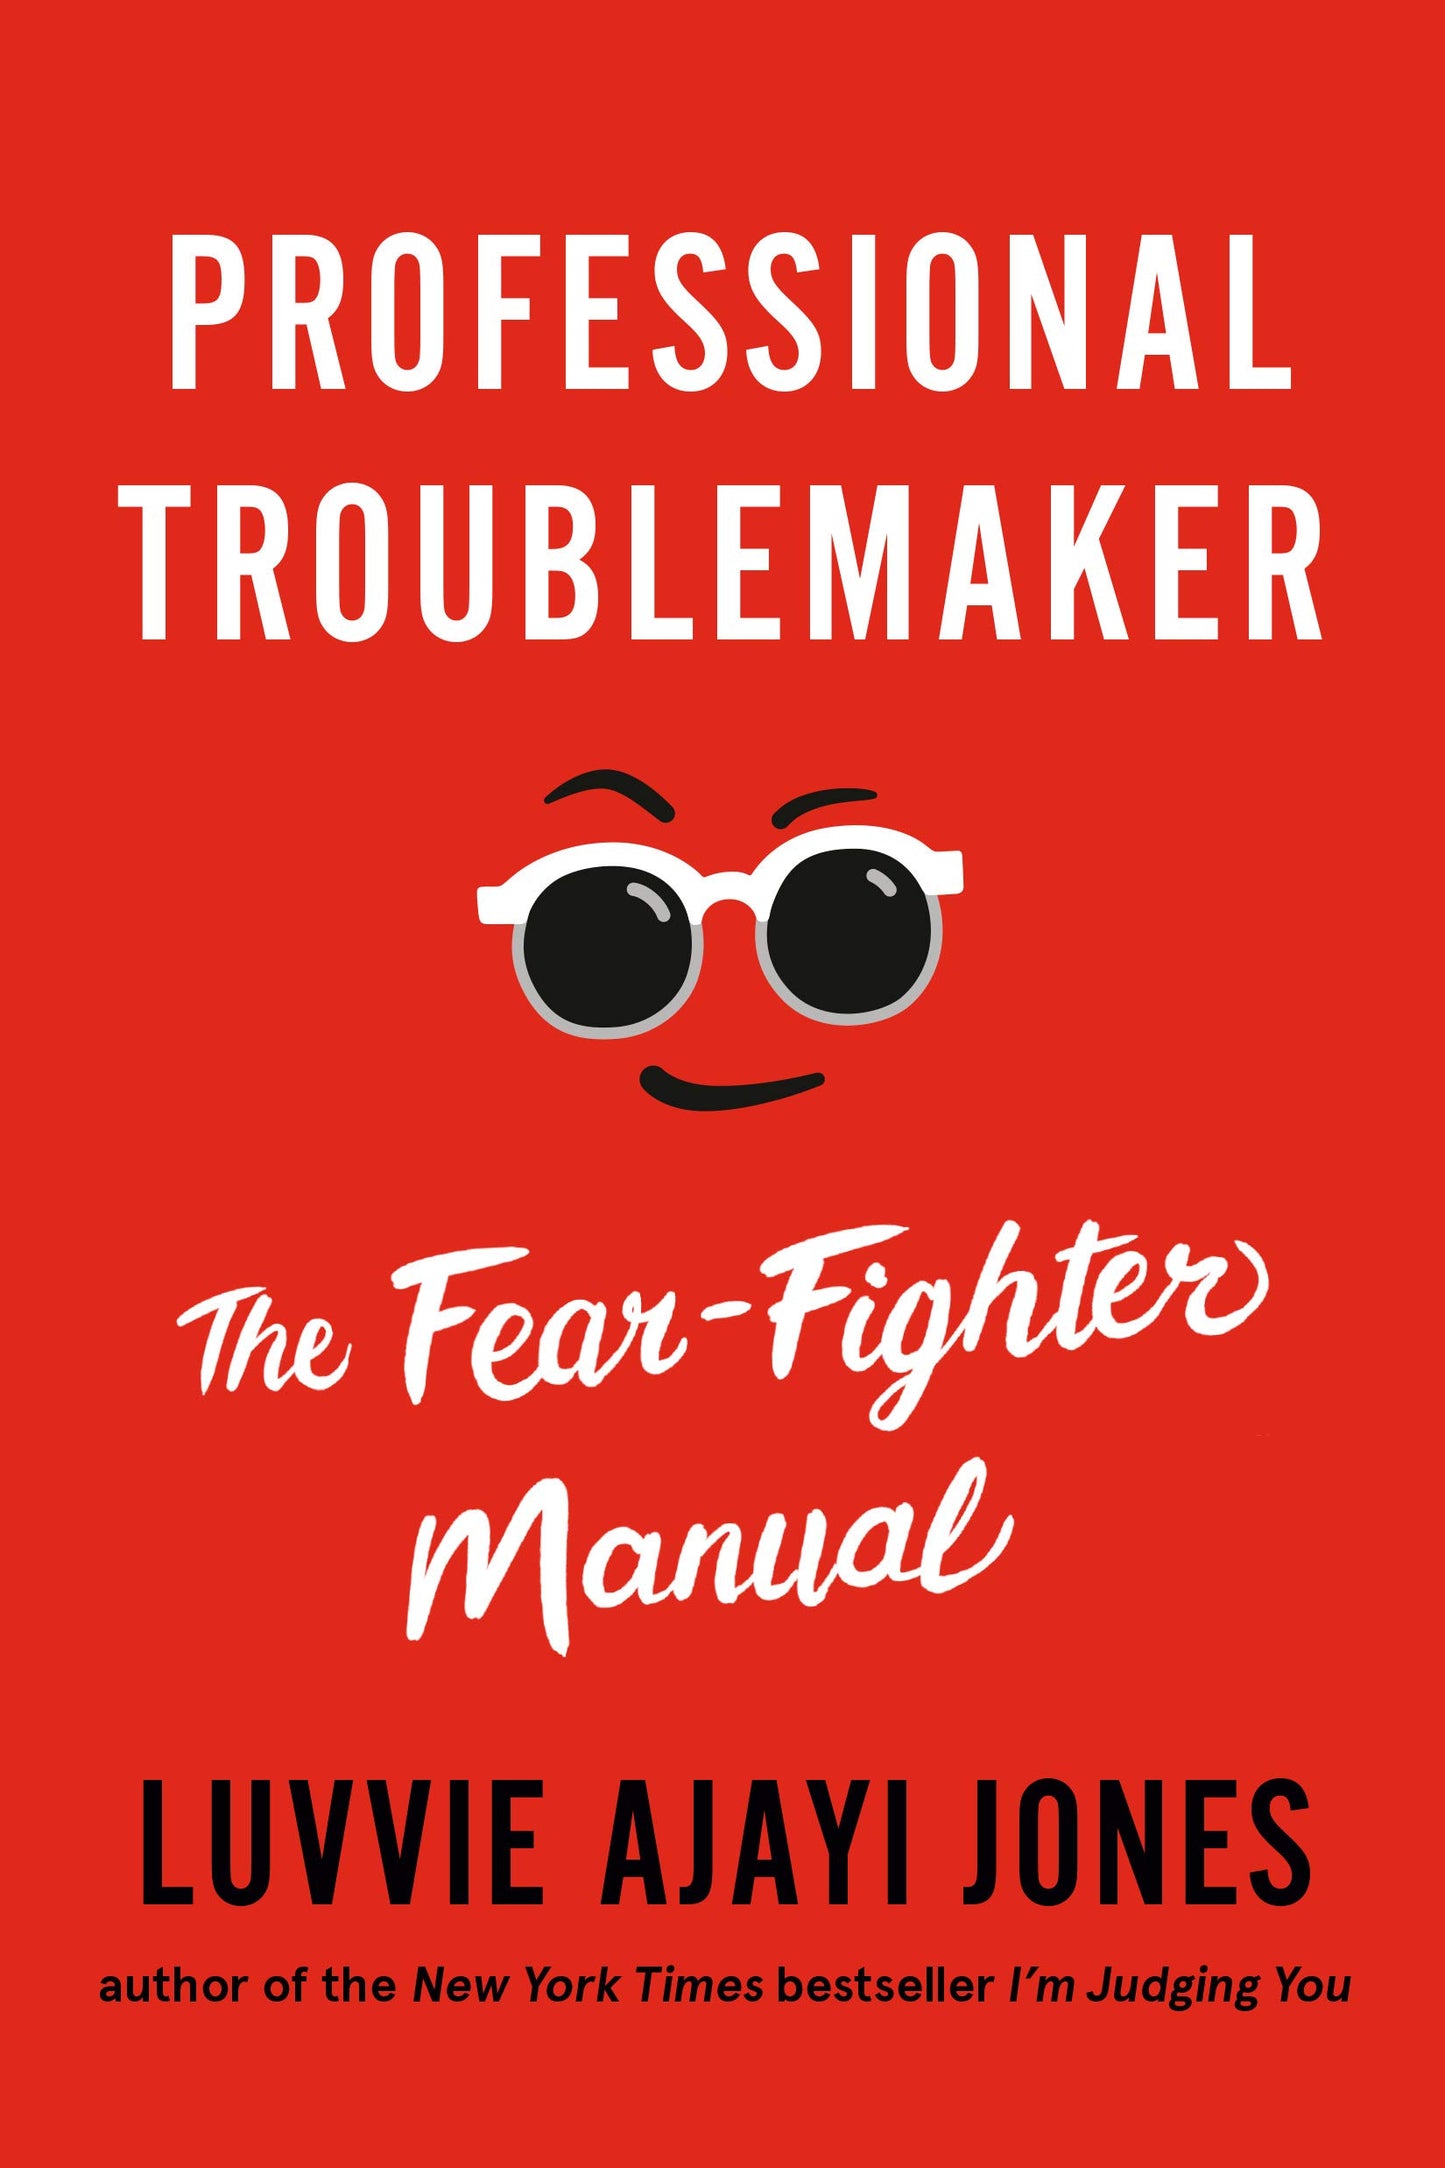 Professional Troublemaker // The Fear-Fighter Manual